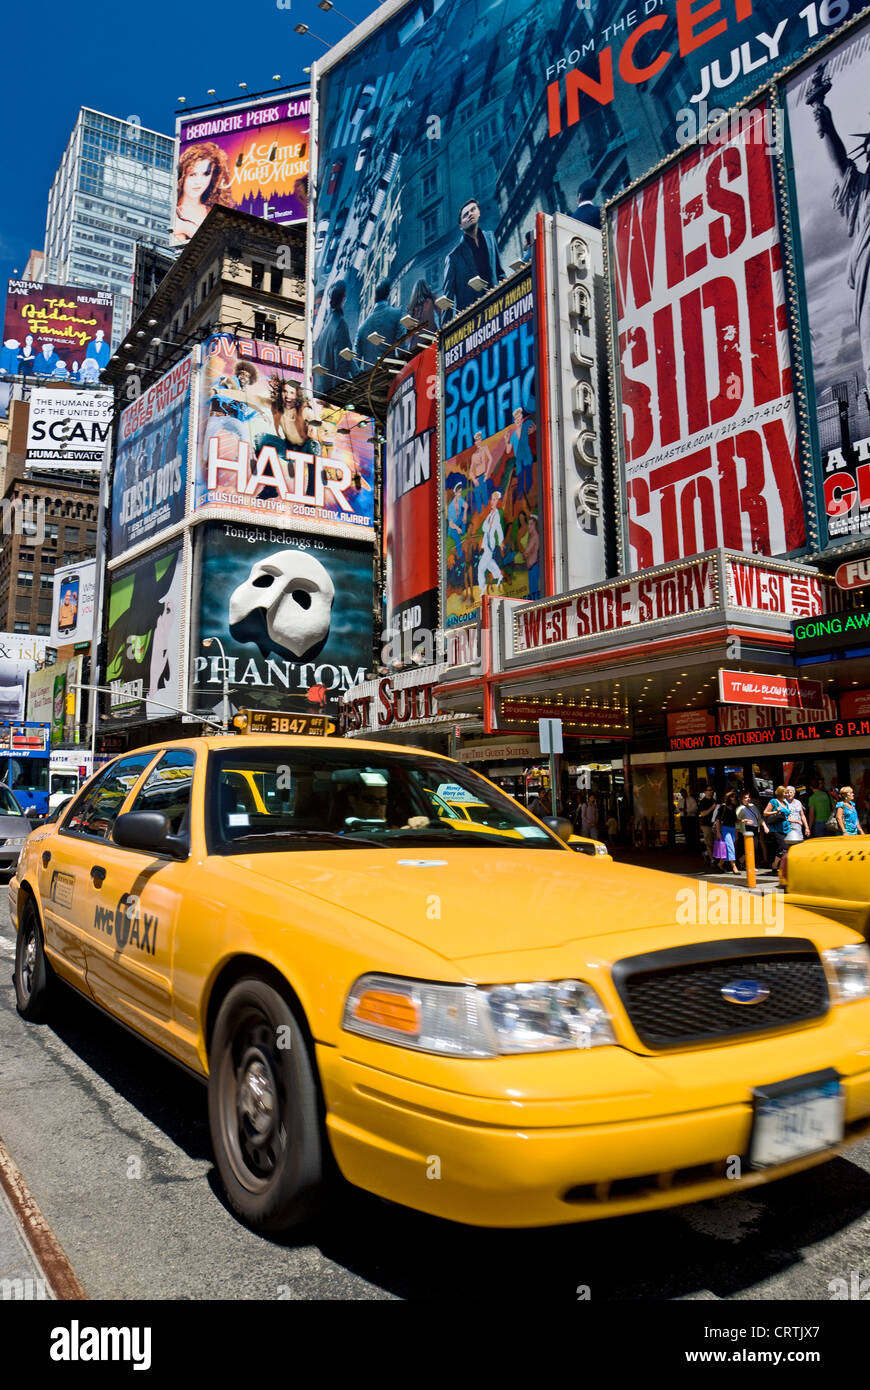 Taxi New York Times Square Taxi, New York City tagsüber Broadway Theater Plakate und Gelbe Taxis Stockfoto